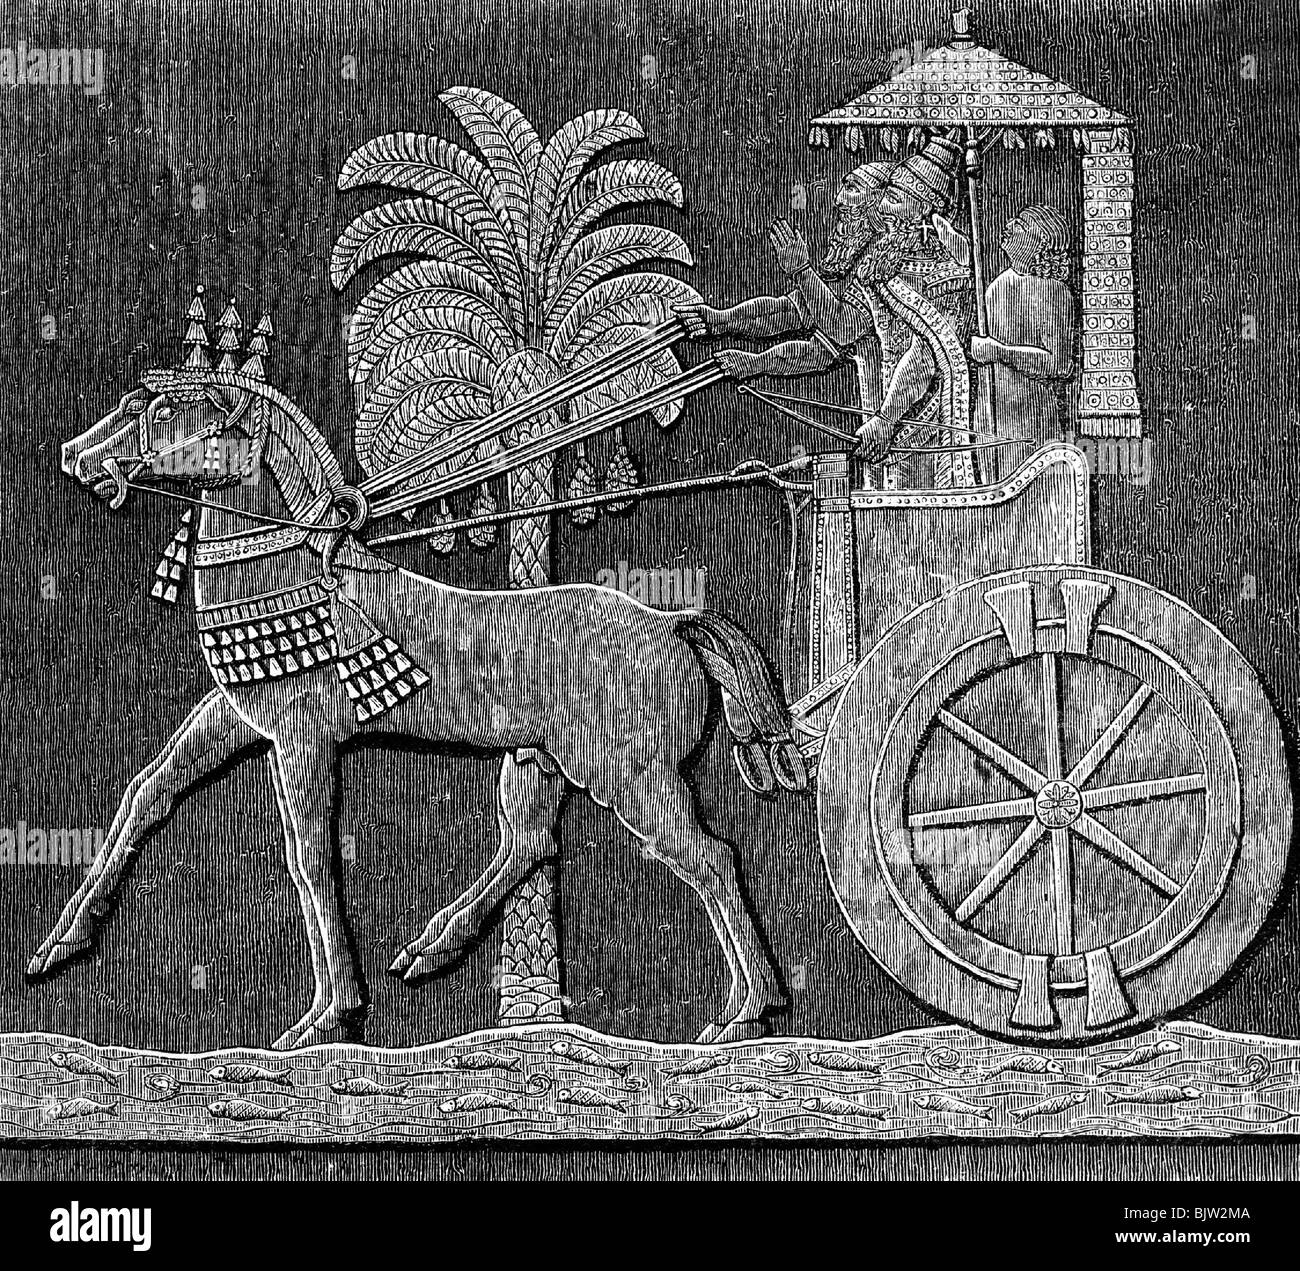 traffic / transport, coach, ancient world, Assyrian king's chariot, wood engraving, 19th century, historic, historical, carriage, coaches, carriages, Assur, Assyria, Biga, sunshade, chariots, horses, ancient world, people, Stock Photo